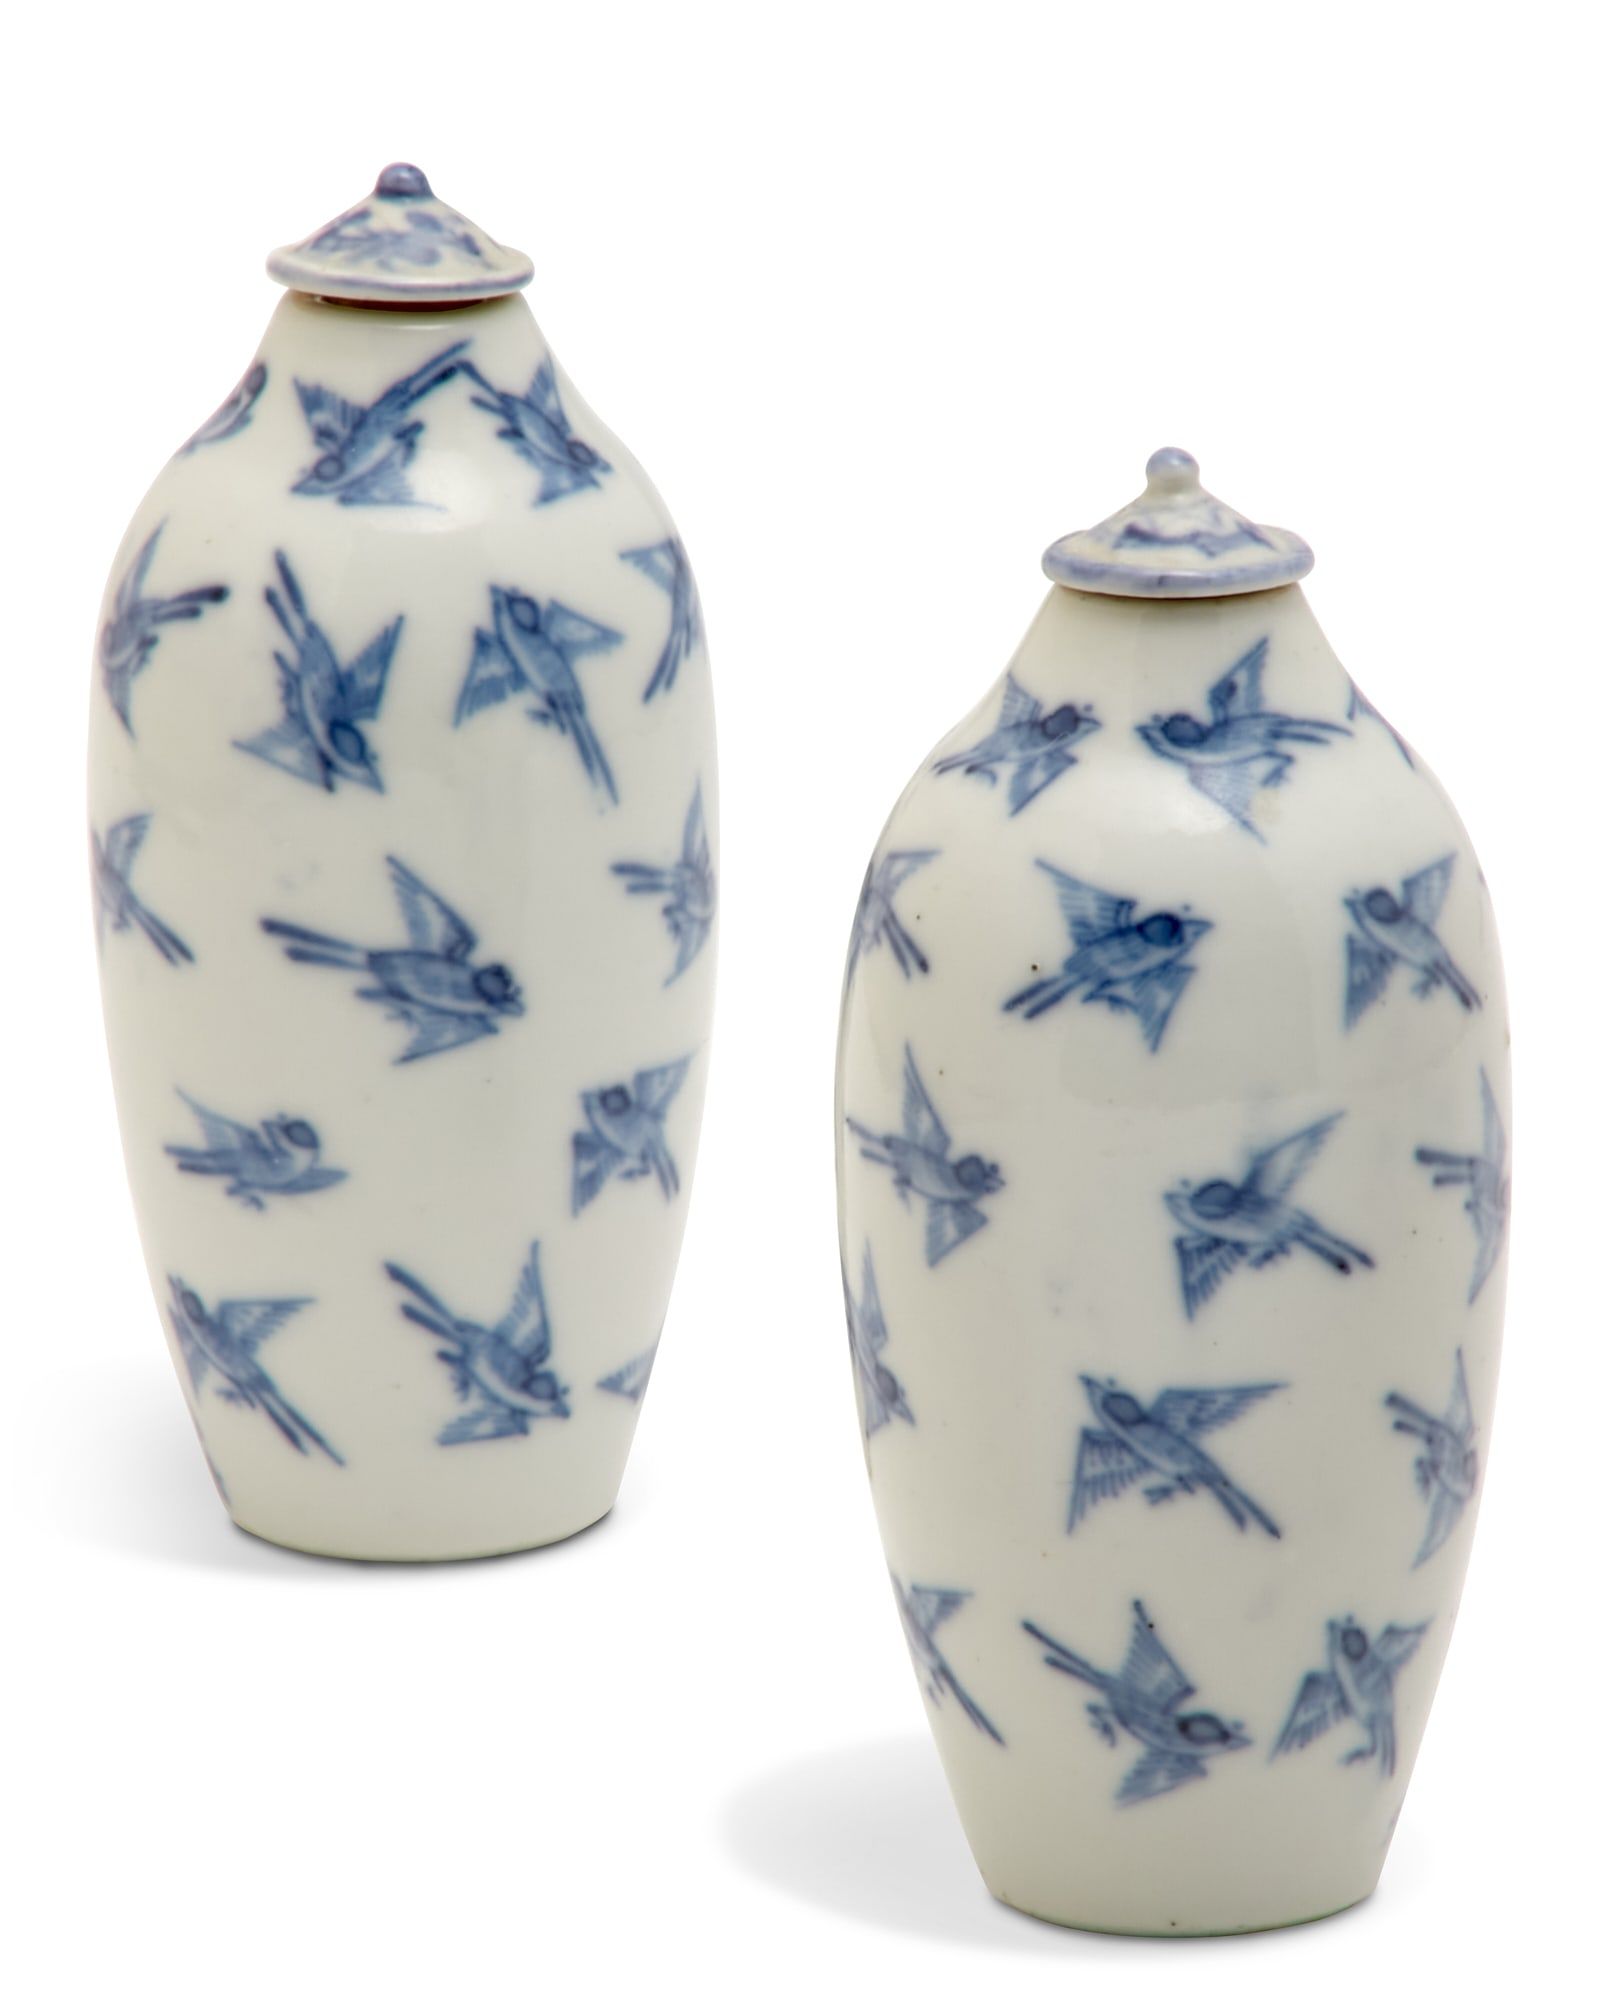 A PAIR OF CHINESE PORCELAIN SNUFF